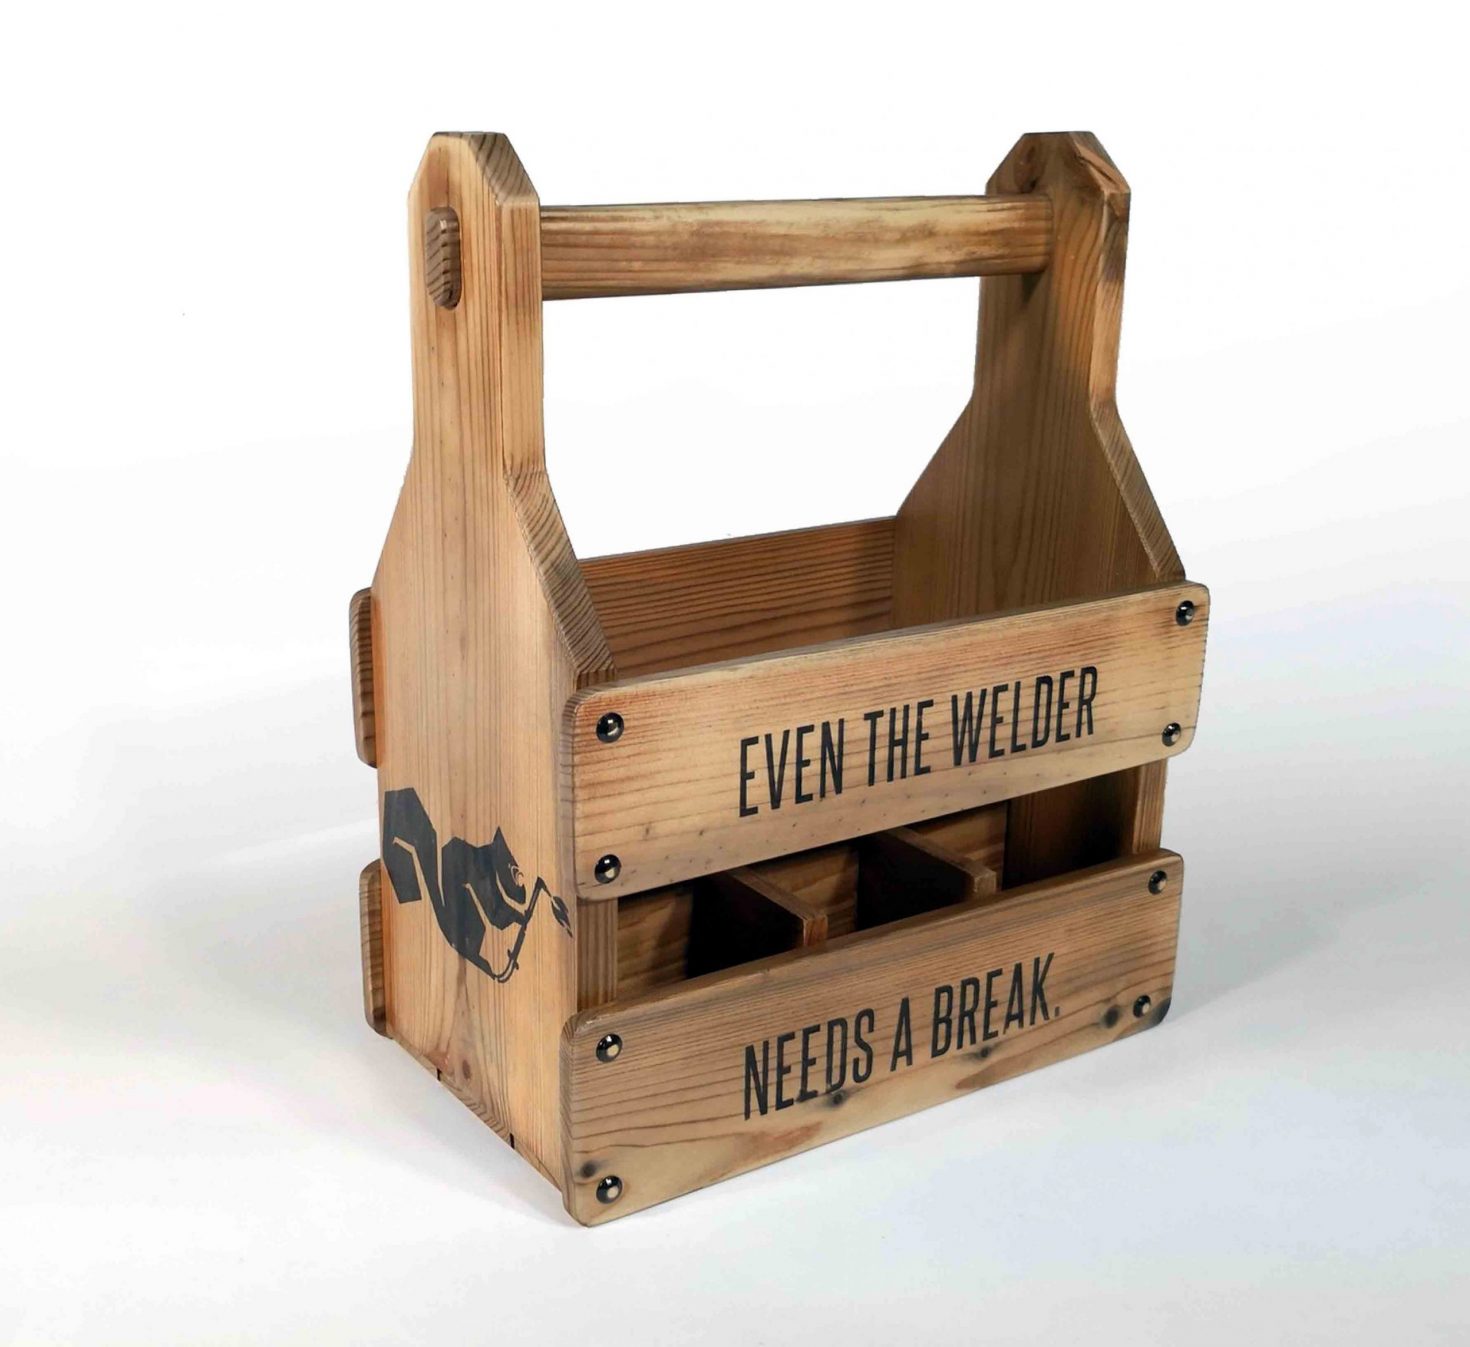 Wooden Beer Crates made in Europe